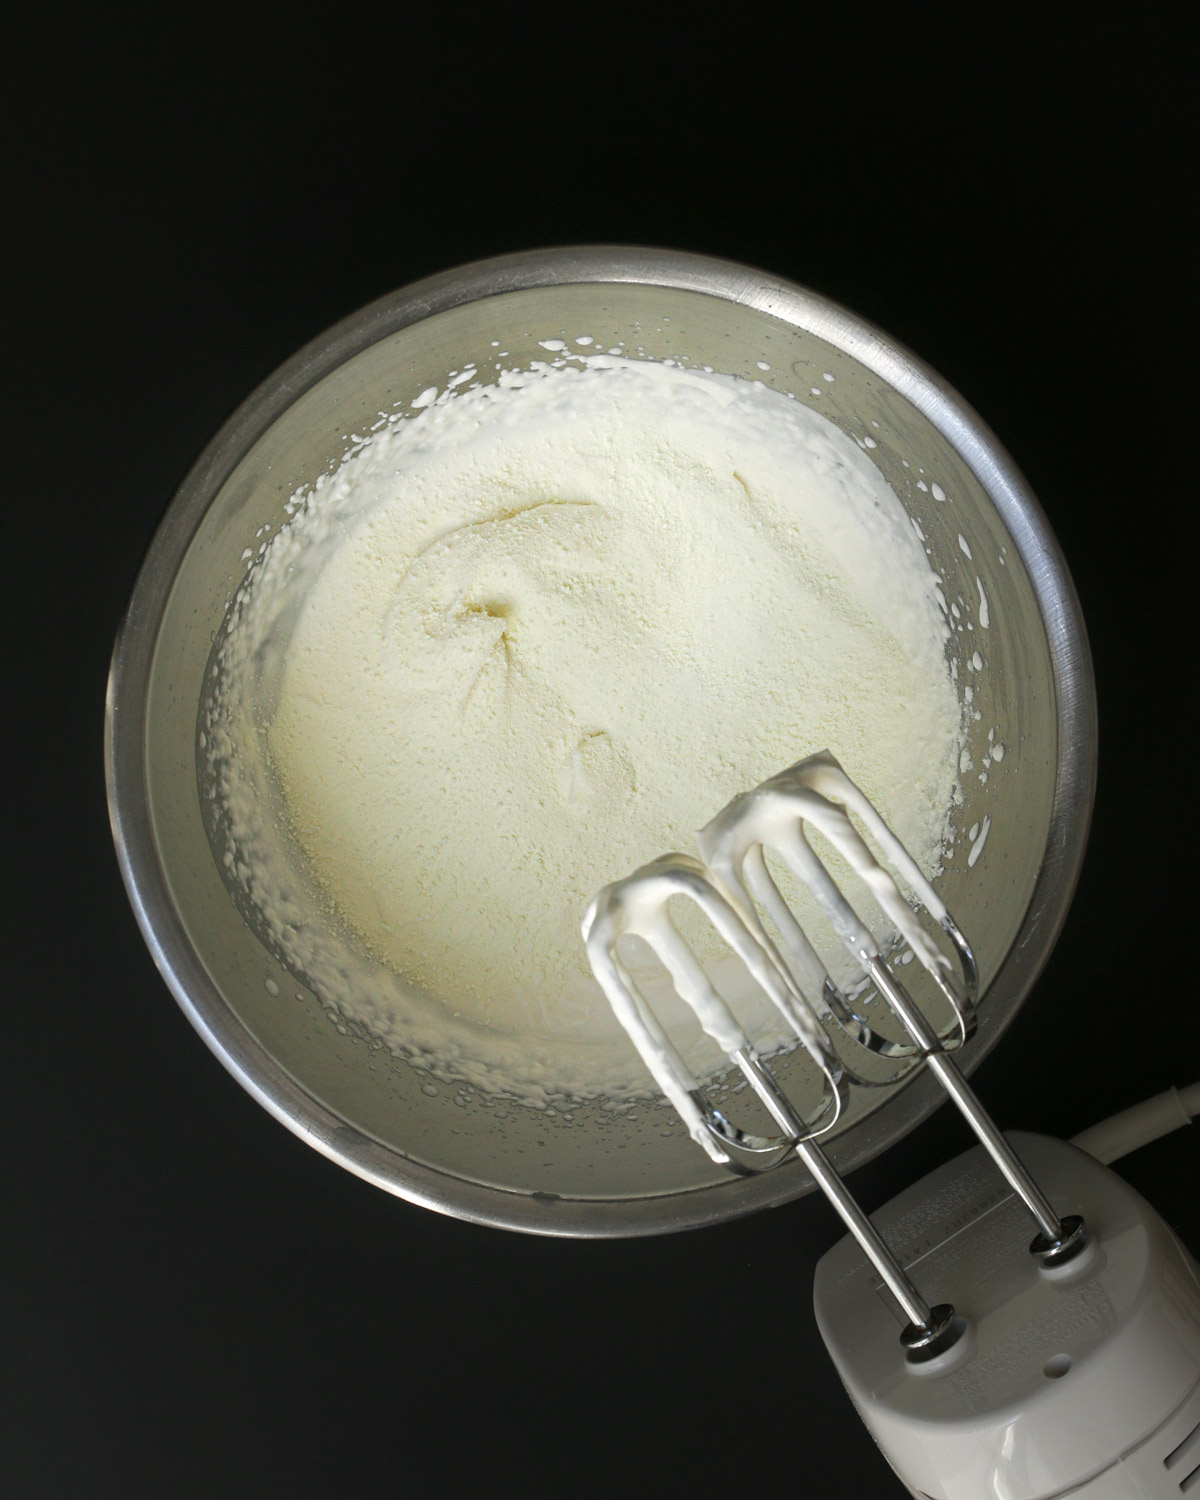 dry milk powder sprinkled across the top of the whipped cream.